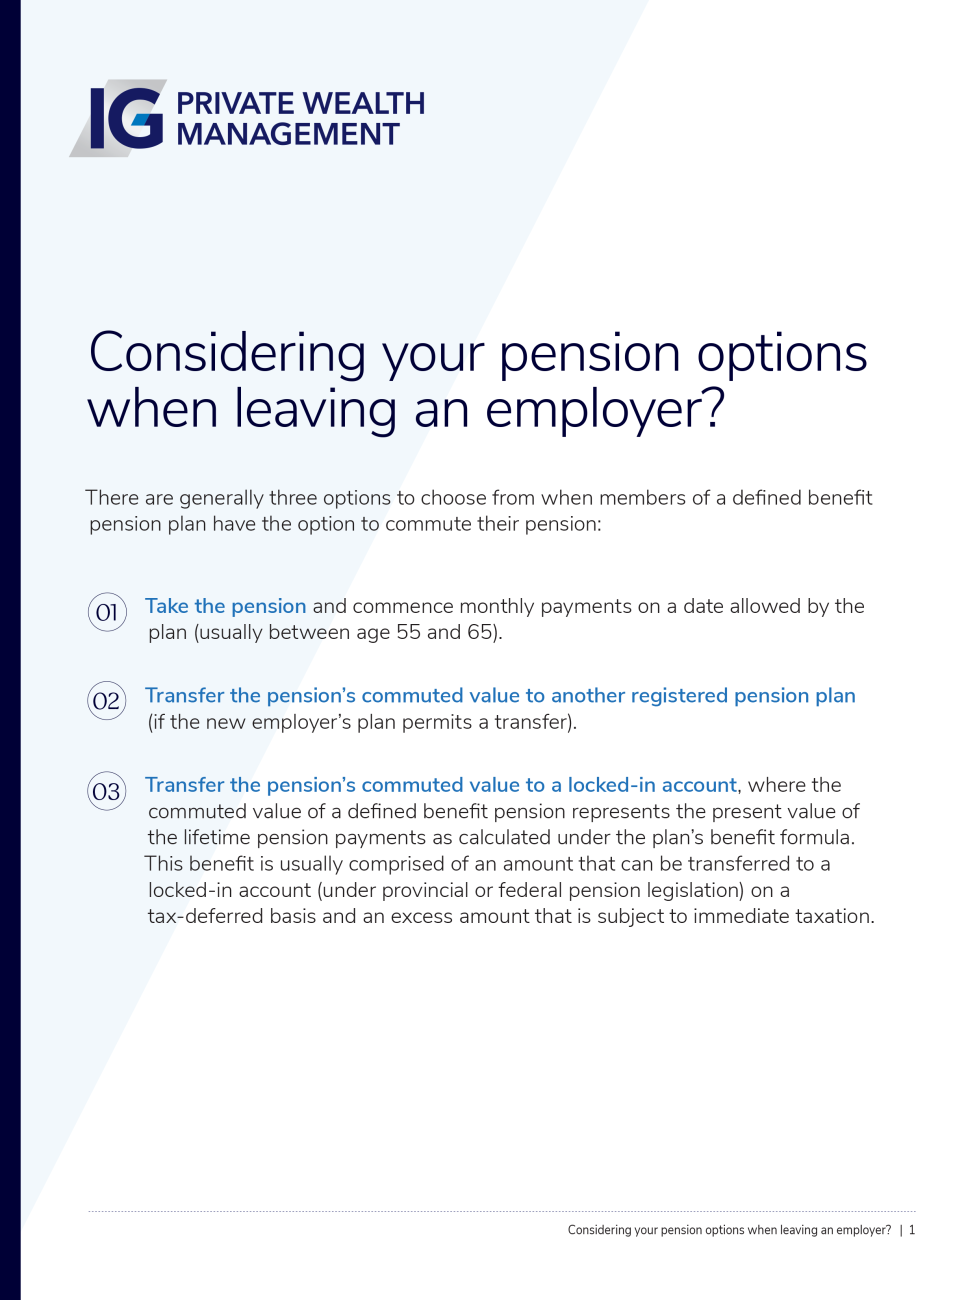 Considering your pension options when leaving an employer?